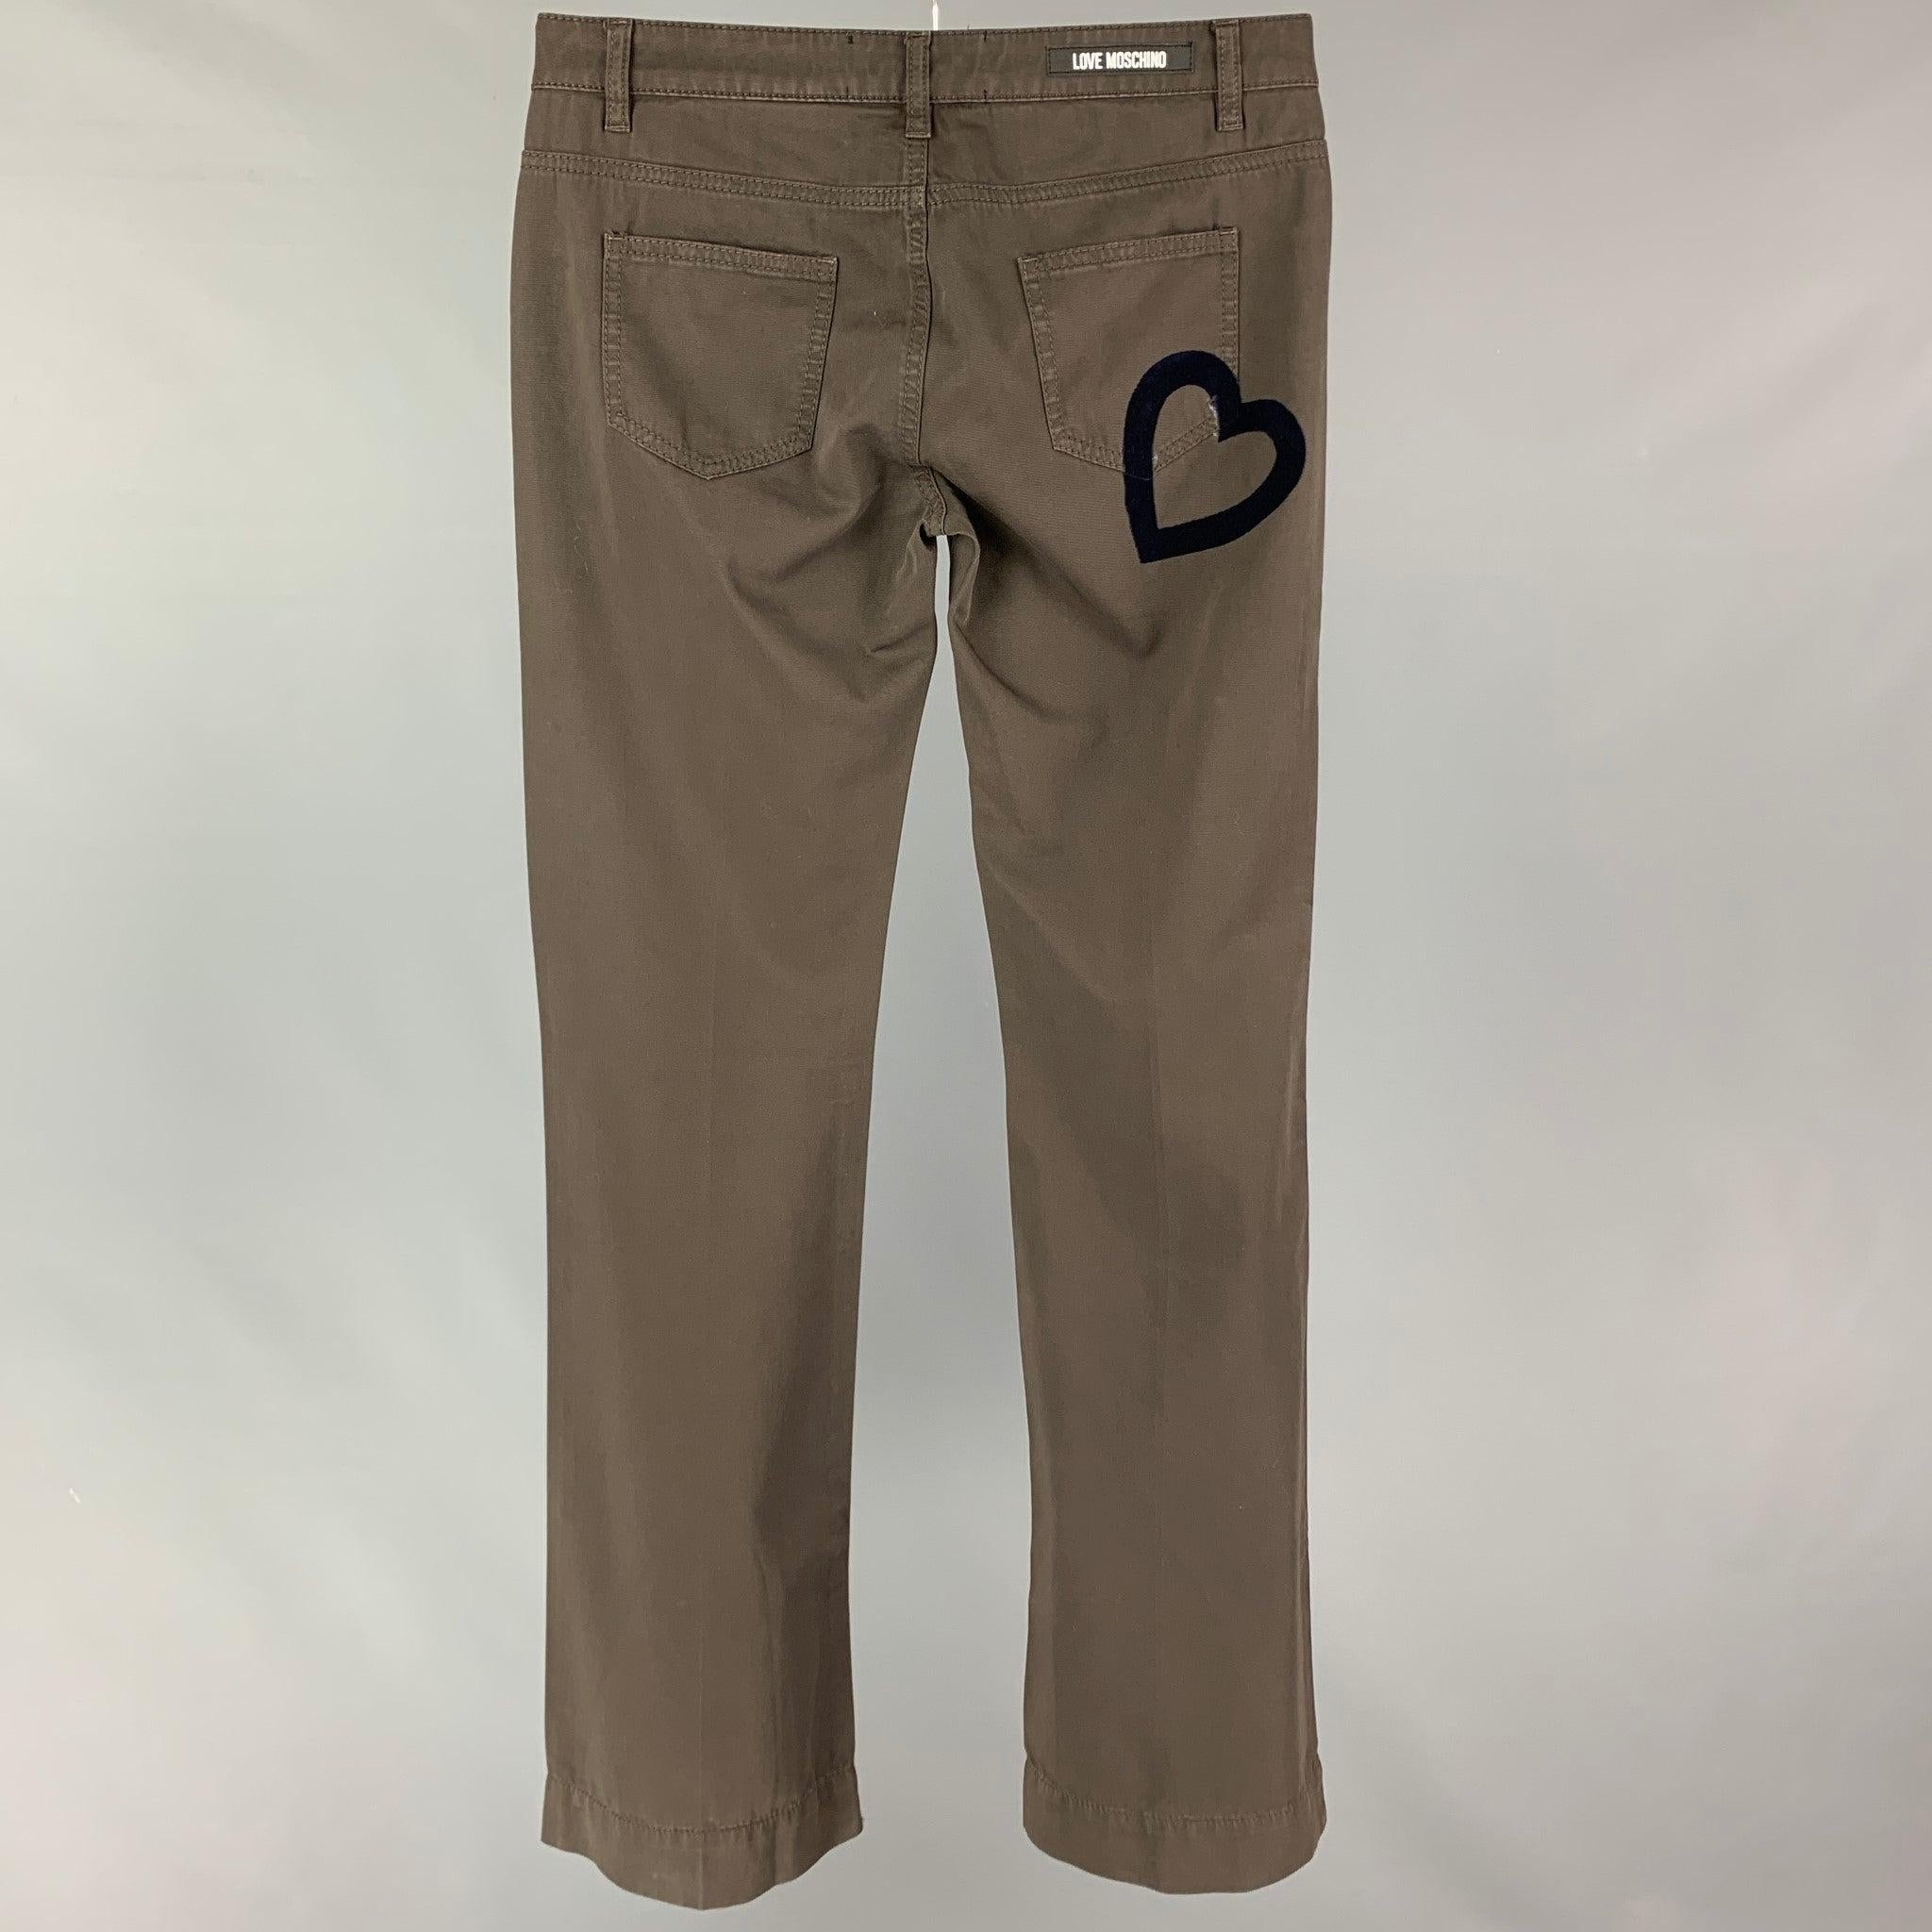 LOVE MOSCHINO casual pants comes in a brown cotton featuring a wide leg, back velvet heart detail, and a button fly closure. Includes tags. Made in Italy.
 Very Good
 Pre-Owned Condition. 
 

 Marked:  26 
 

 Measurements: 
  Waist: 30 inches Rise: